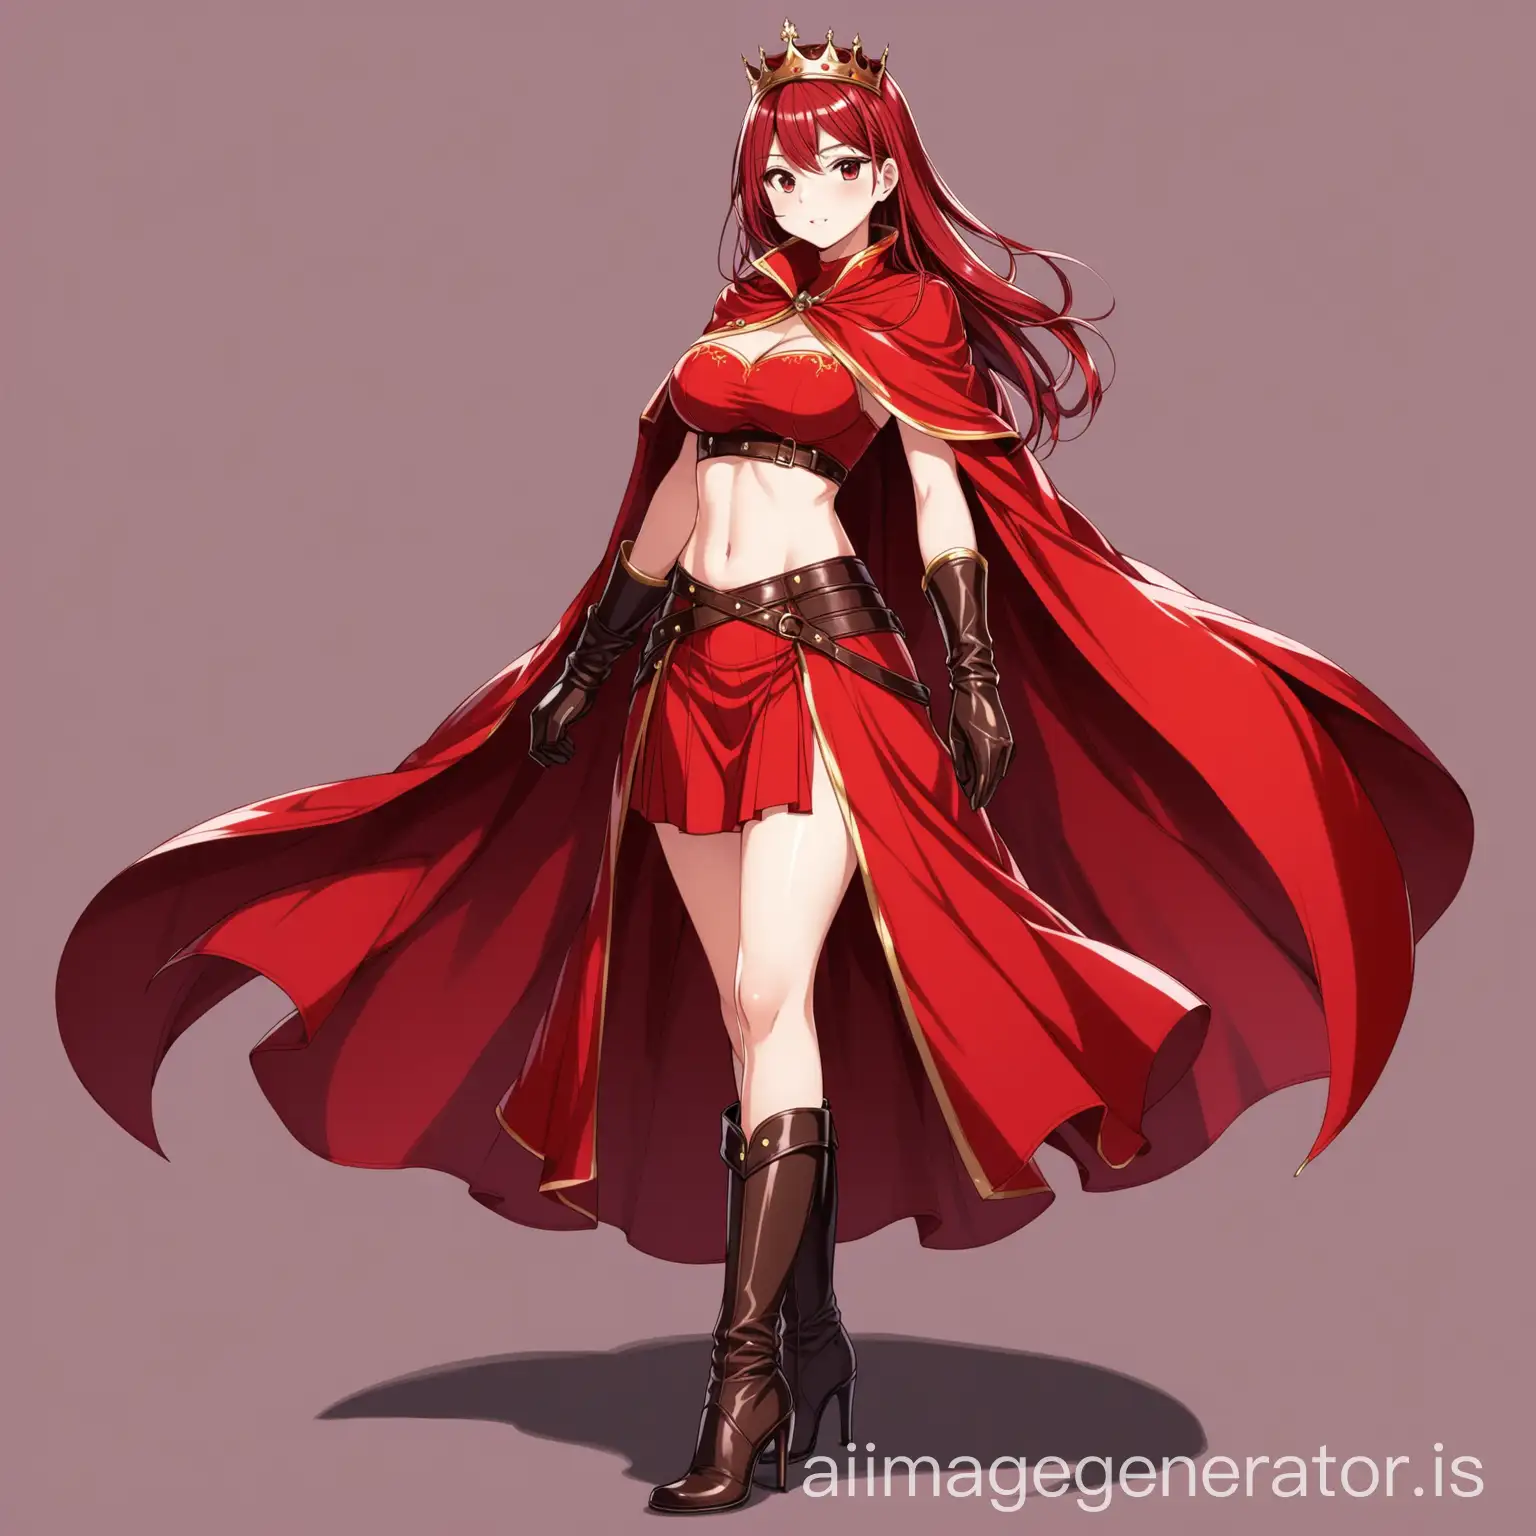 Elegant-Anime-Girl-in-Royal-Red-Dress-with-Cape-and-Leather-Accessories